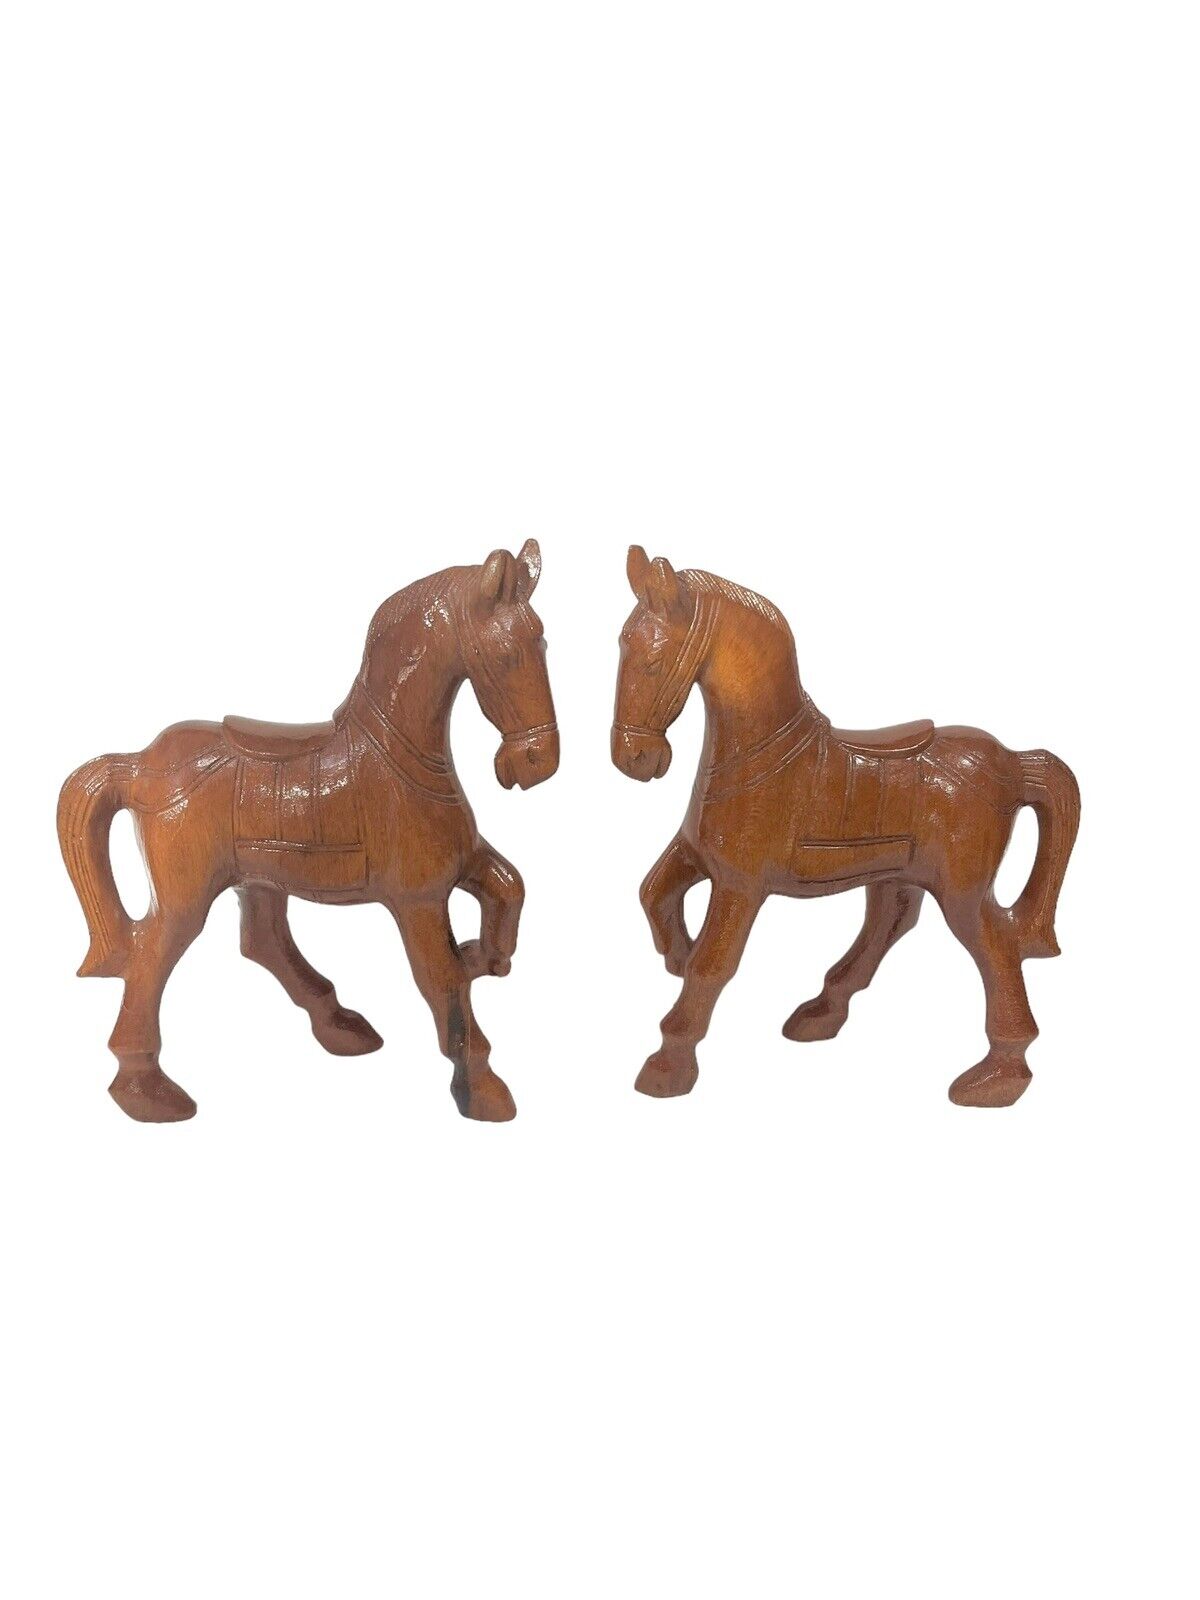 Pair Of Carved Wooden Horse Figurine Chinese Wood 10,5”